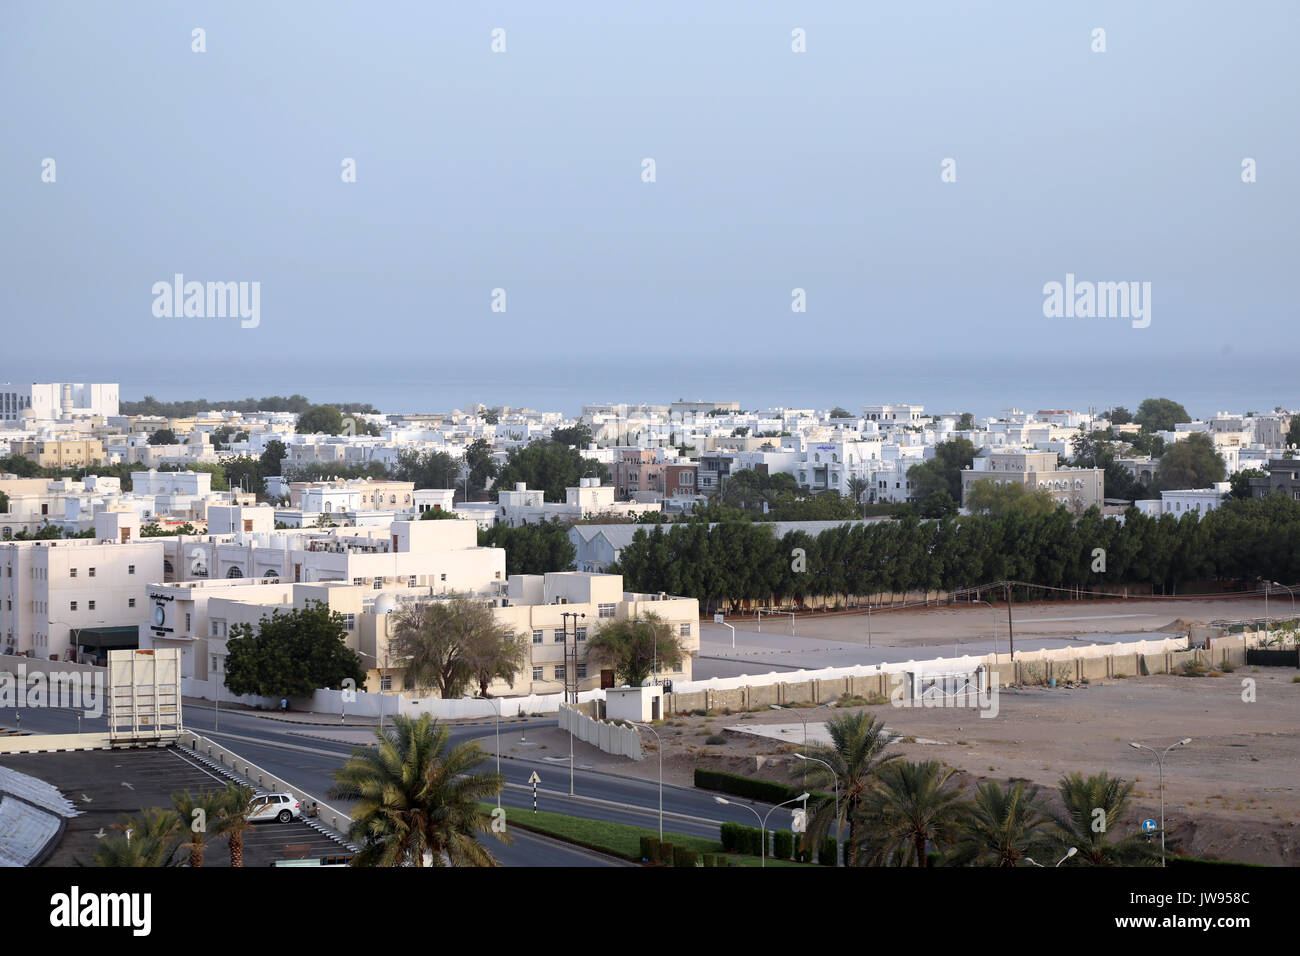 The white-washed low-rise homes, offices and other buildings of the Al Ghubra area of the Omani capital, Muscat on 8 August 2017 Stock Photo